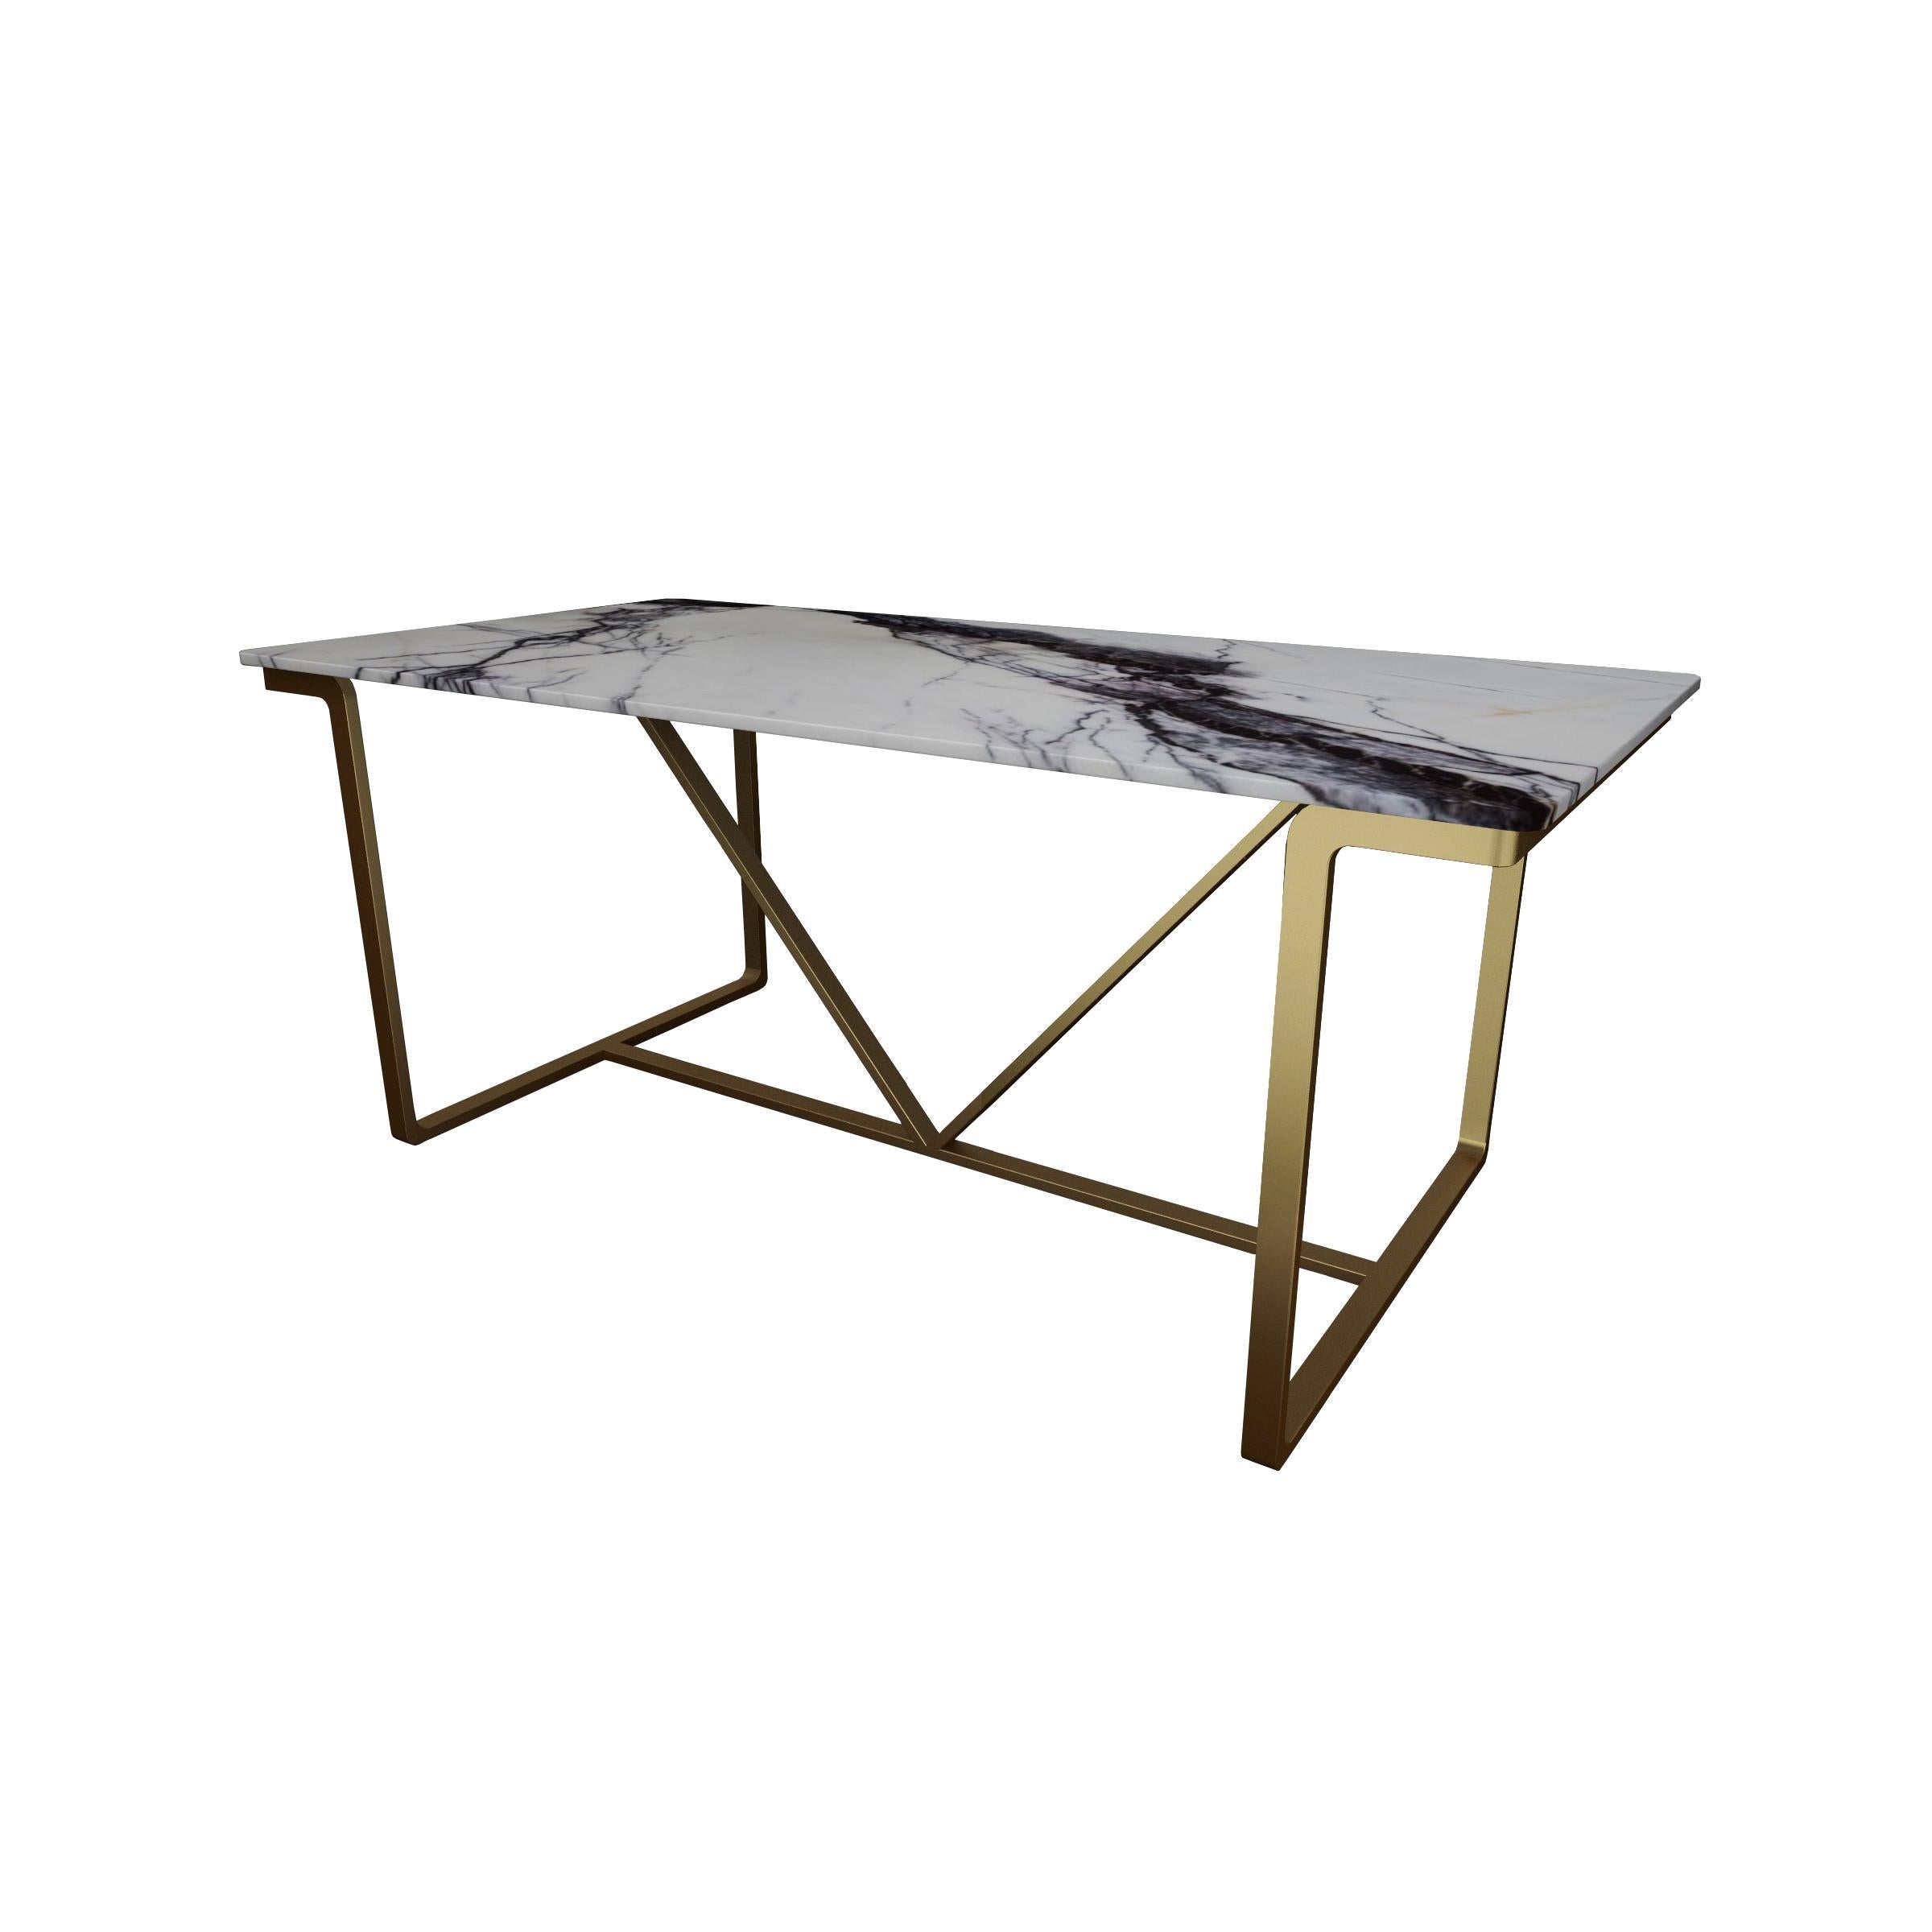 𝗣𝗿𝗼𝗱𝘂𝗰𝘁 𝗗𝗲𝘁𝗮𝗶𝗹𝘀:
Skilled work in the creation of this collection characterised by the bending technic of the frame instead of the regular welding. The marble edges have been rounded down to give a better feeling during usage, and the